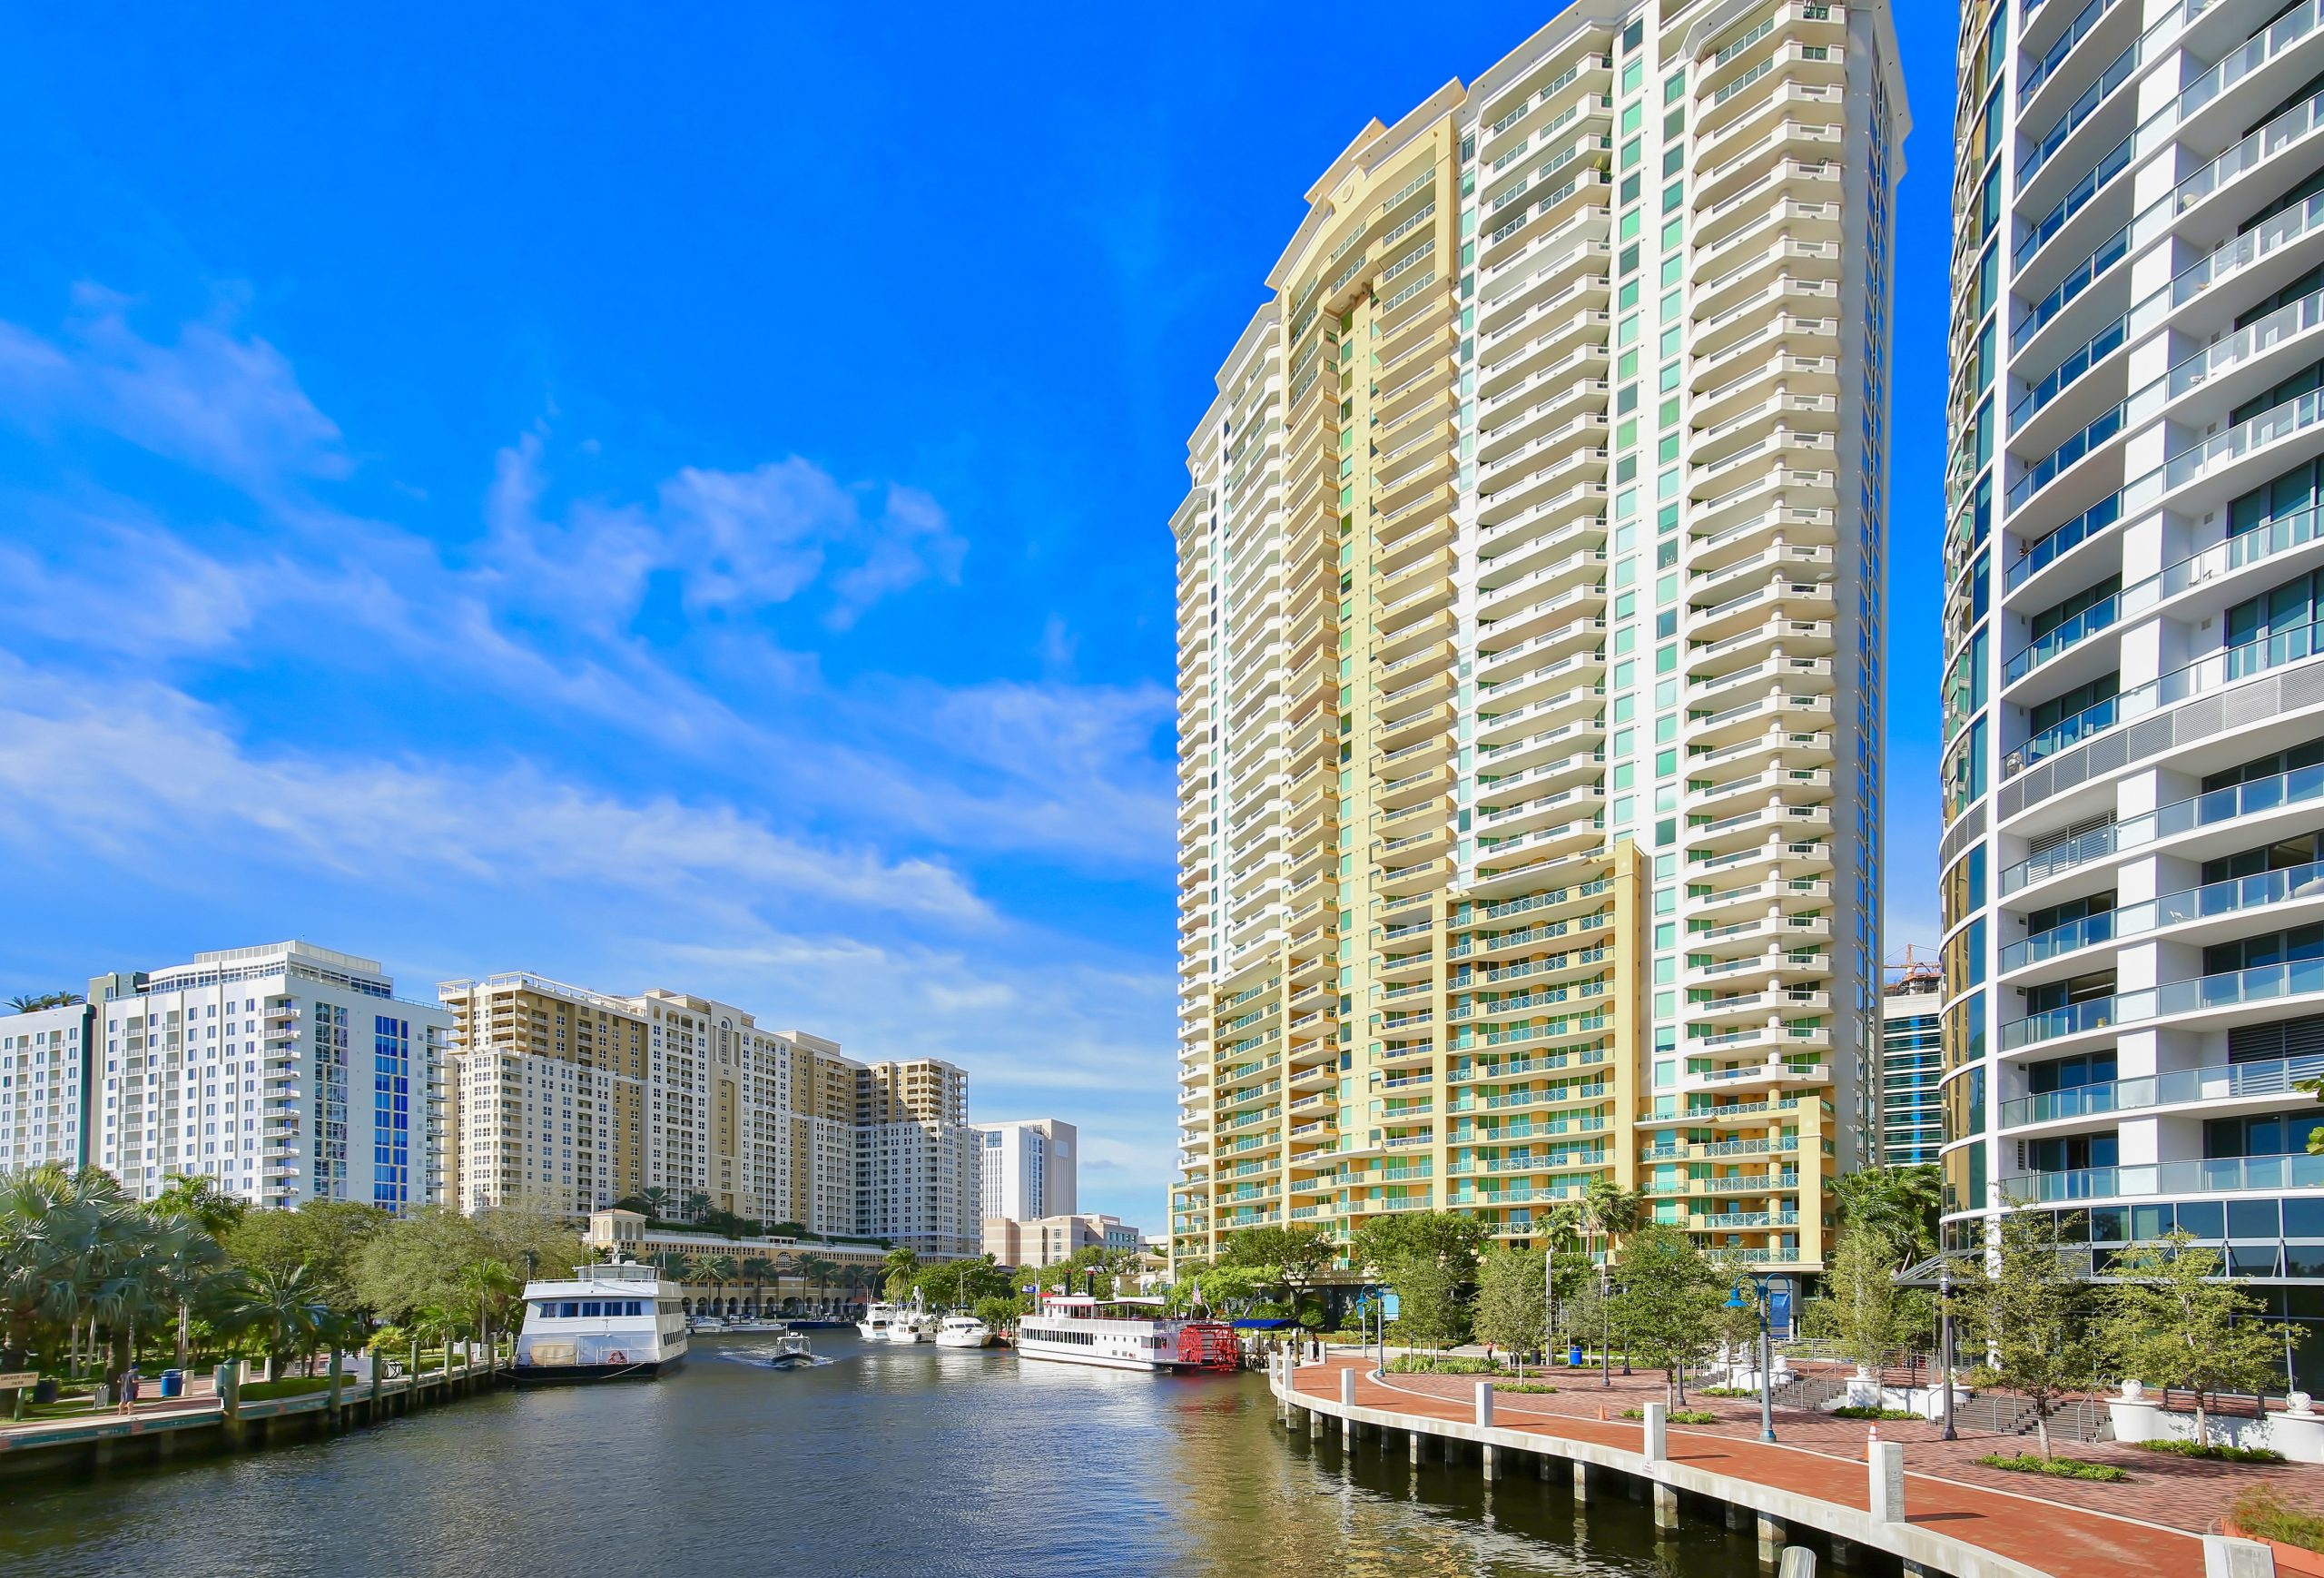 Fort Lauderdale's Riverfront, bustling with boating activity and lined with highrise condos and apartments located at Las Olas Boulevard in downtown Fort Lauderdale, Florida.